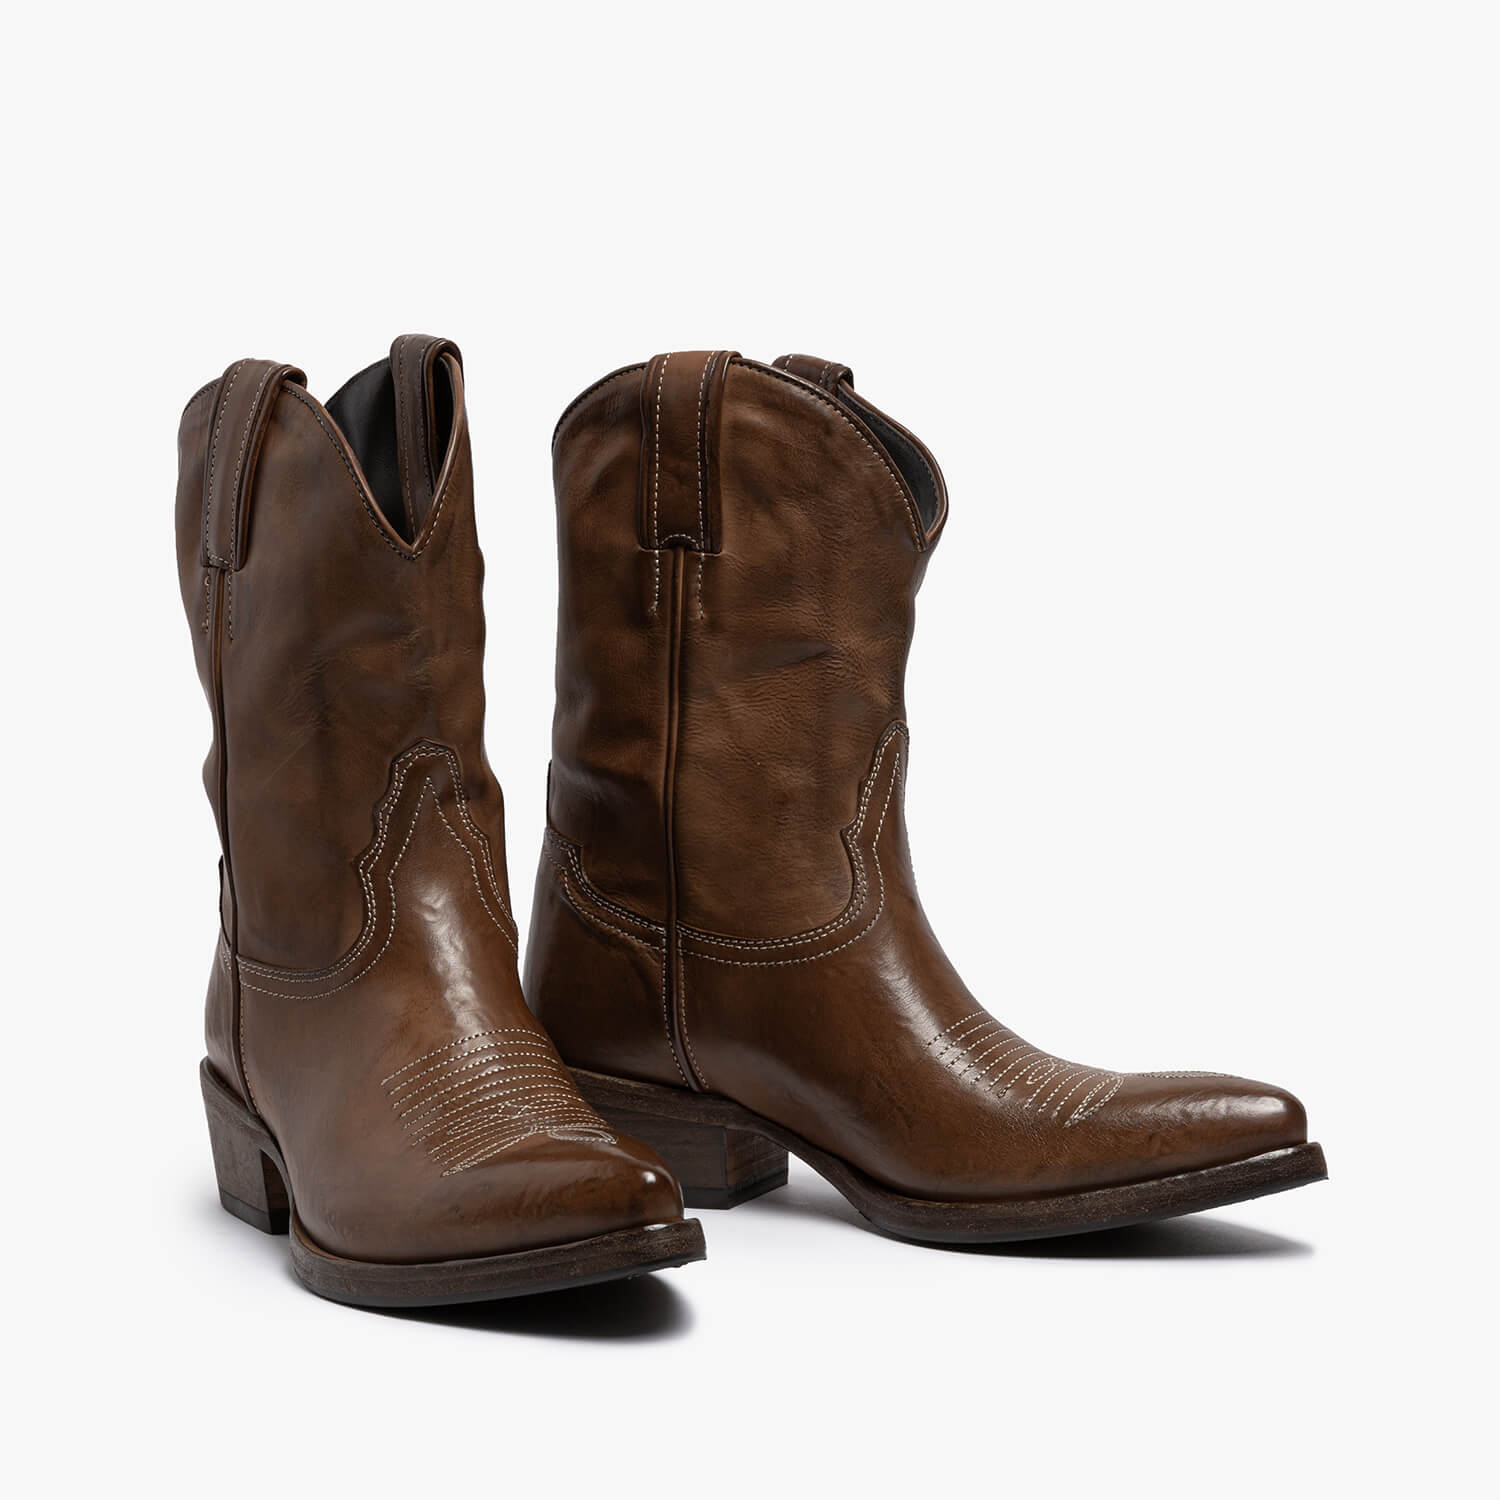 Alessandra | Calf leather brown mid Texan boot